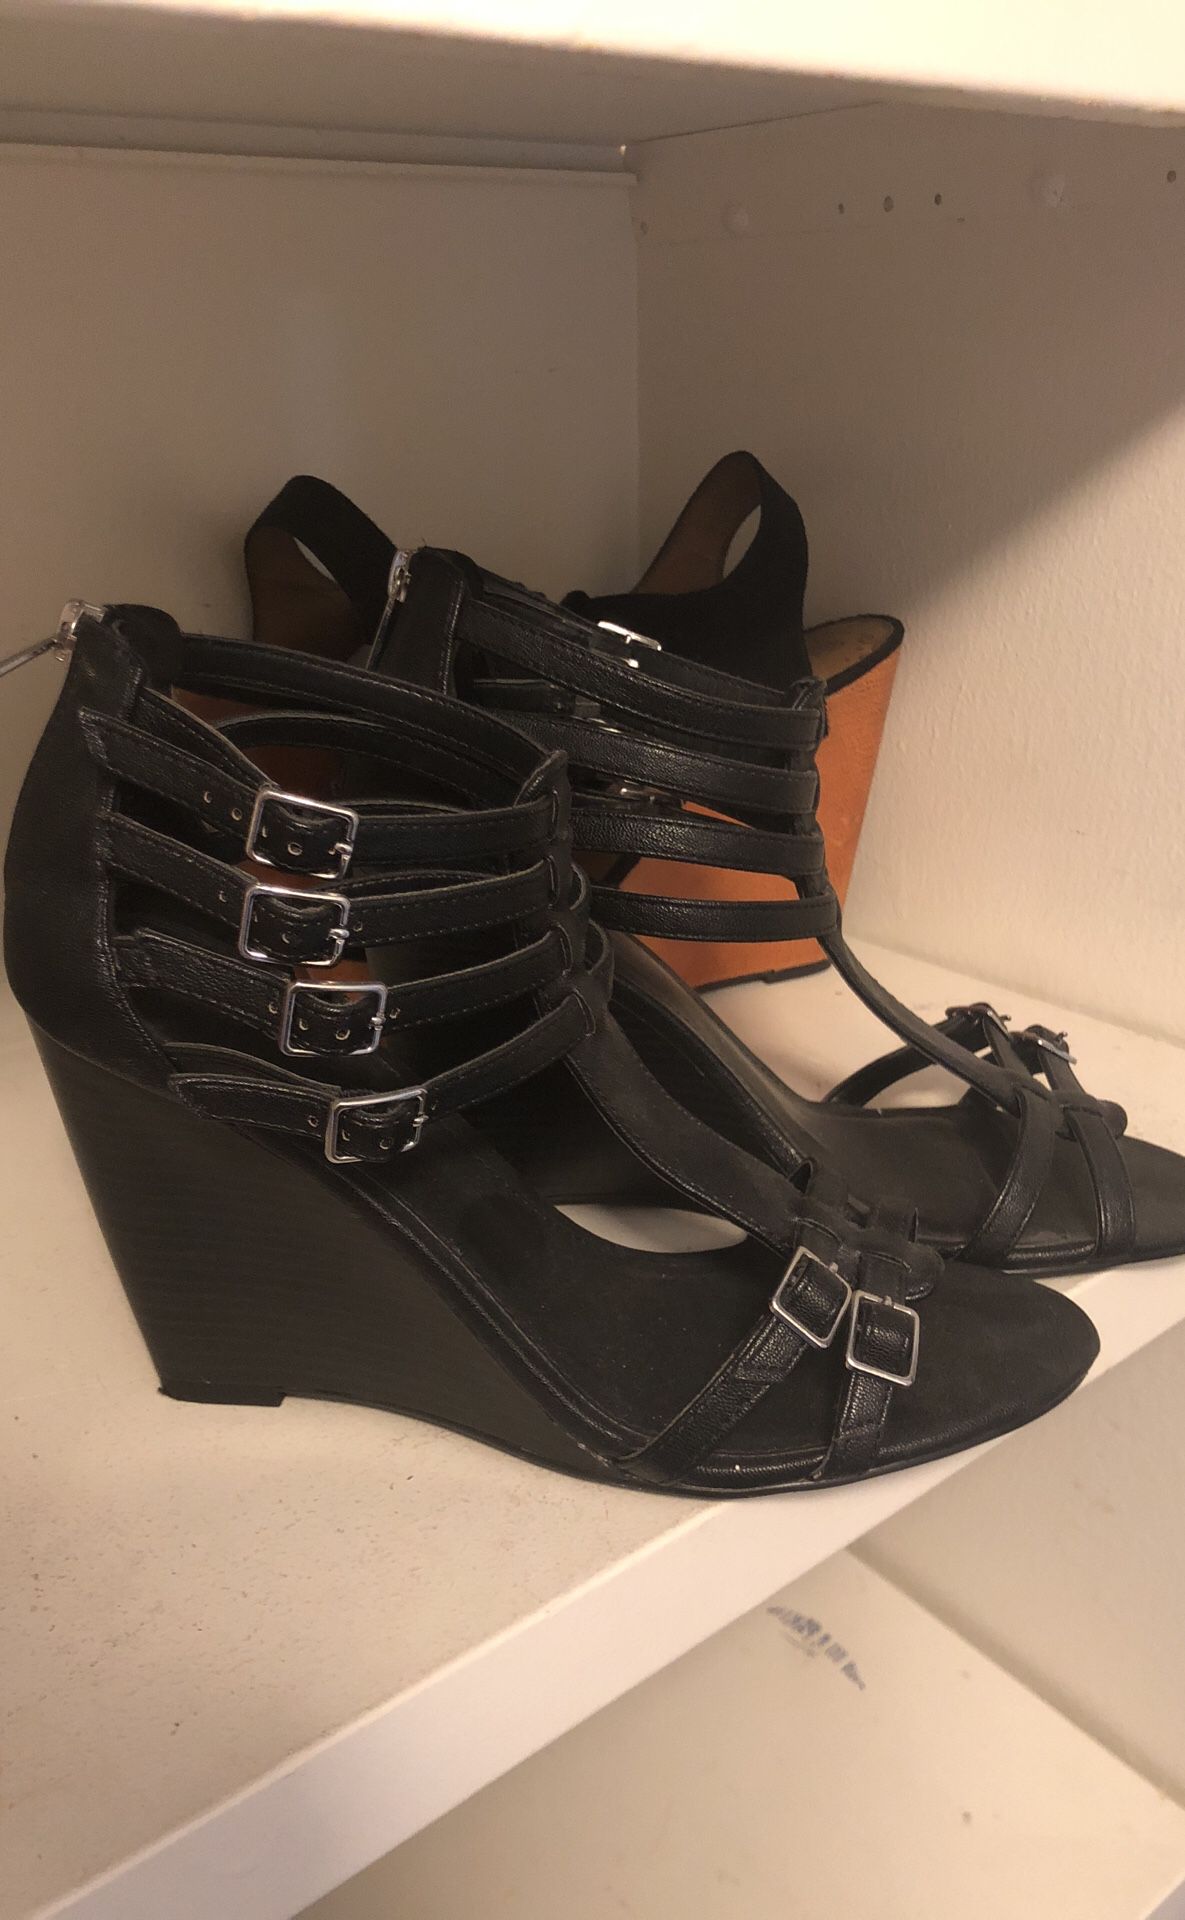 Wedge size 10 Brand Express